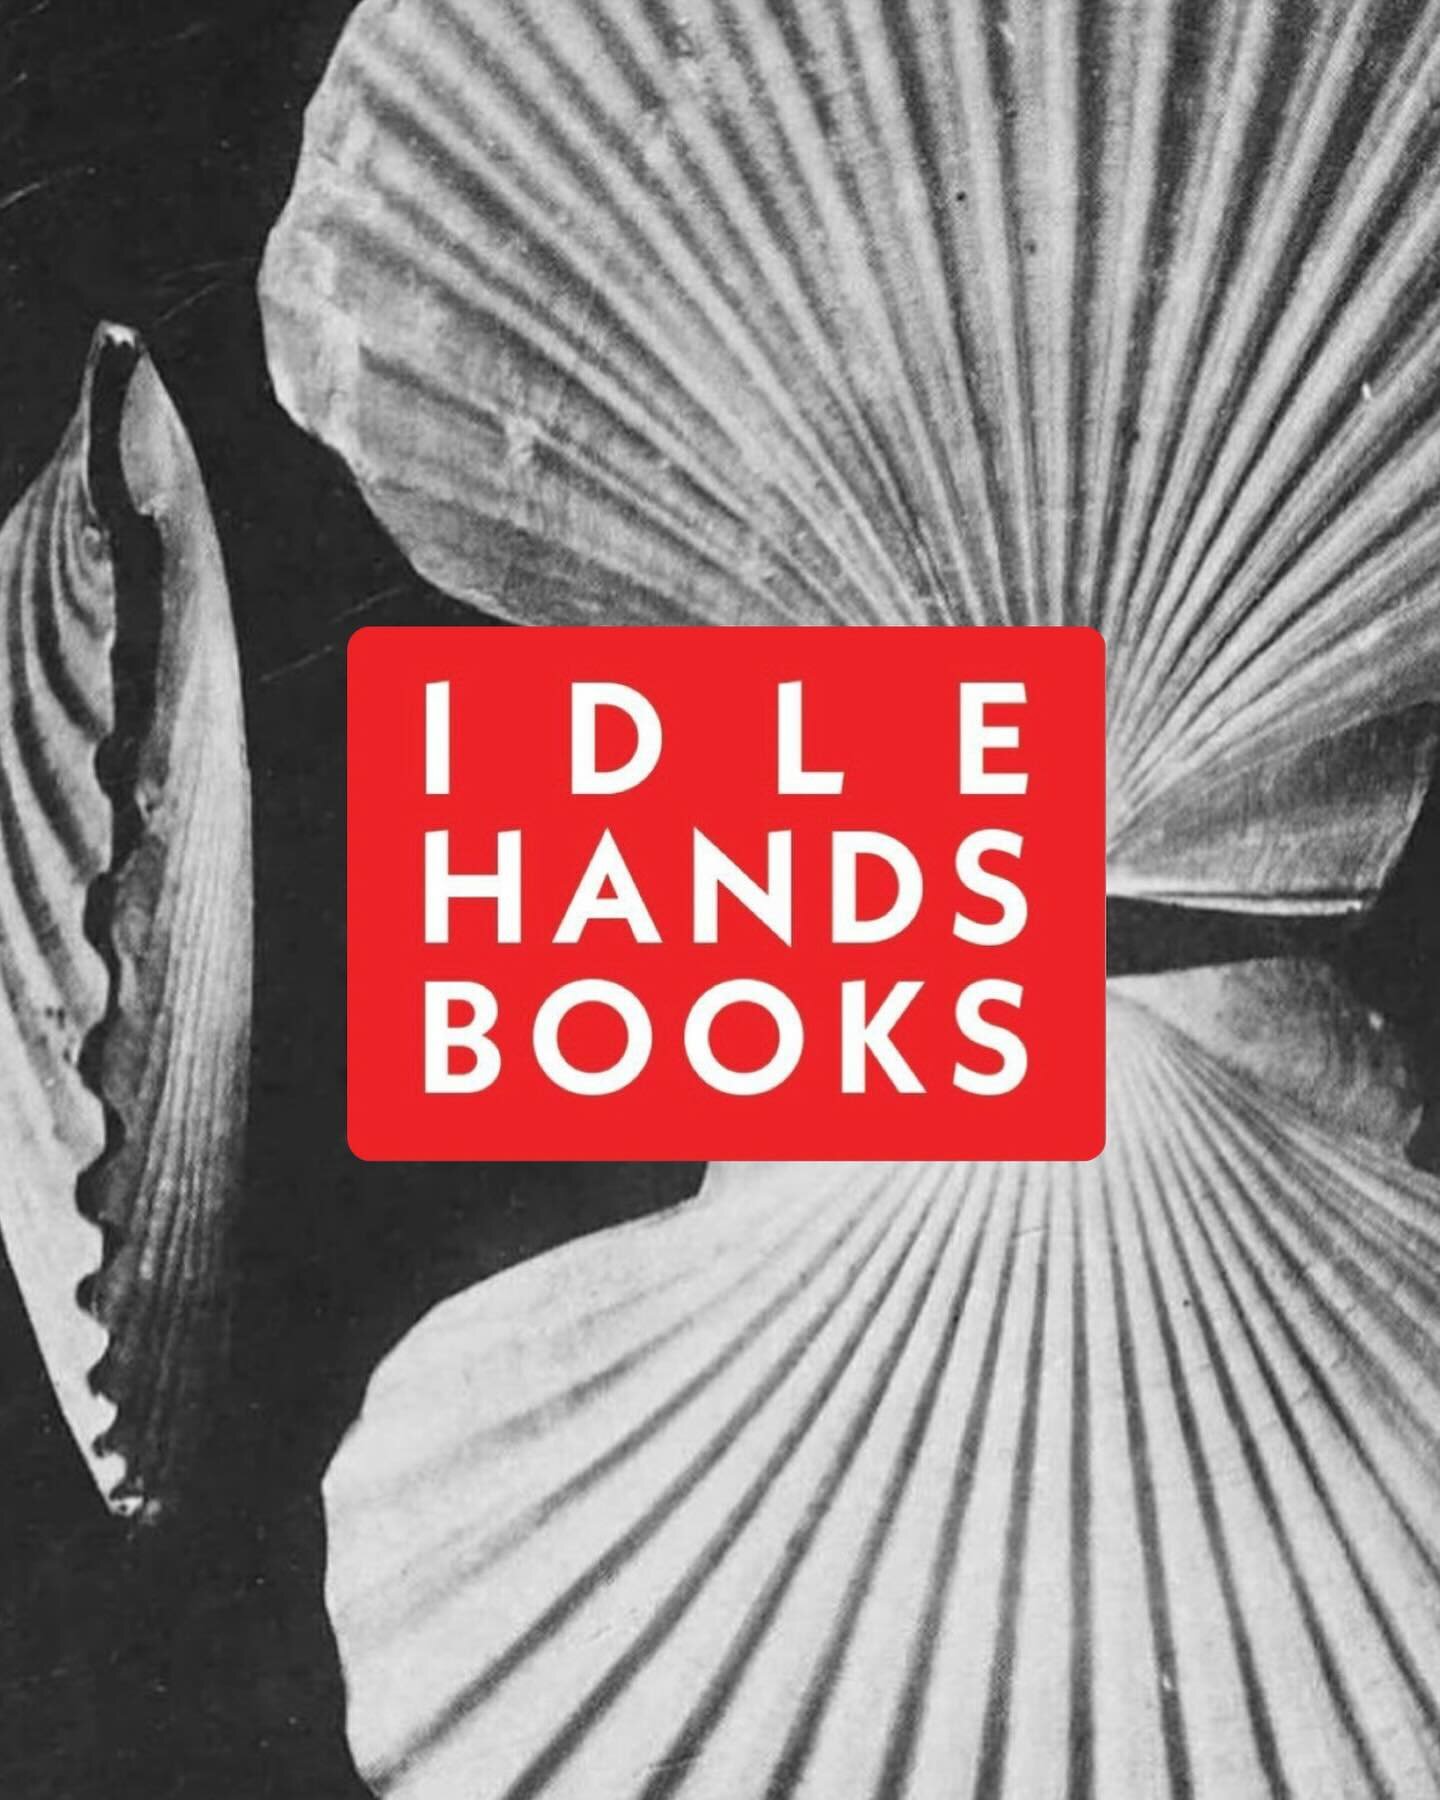 THIS SUNDAY 4/6 @idlehandsbooks &mdash; austin, texas&rsquo; most loved pop-up bookseller curating literary fiction, poetry, theory, and leftist politics 

COME ON OUT 🤠 FOR BRUNCH 10-2 GARBO&rsquo;S ON LAMAR